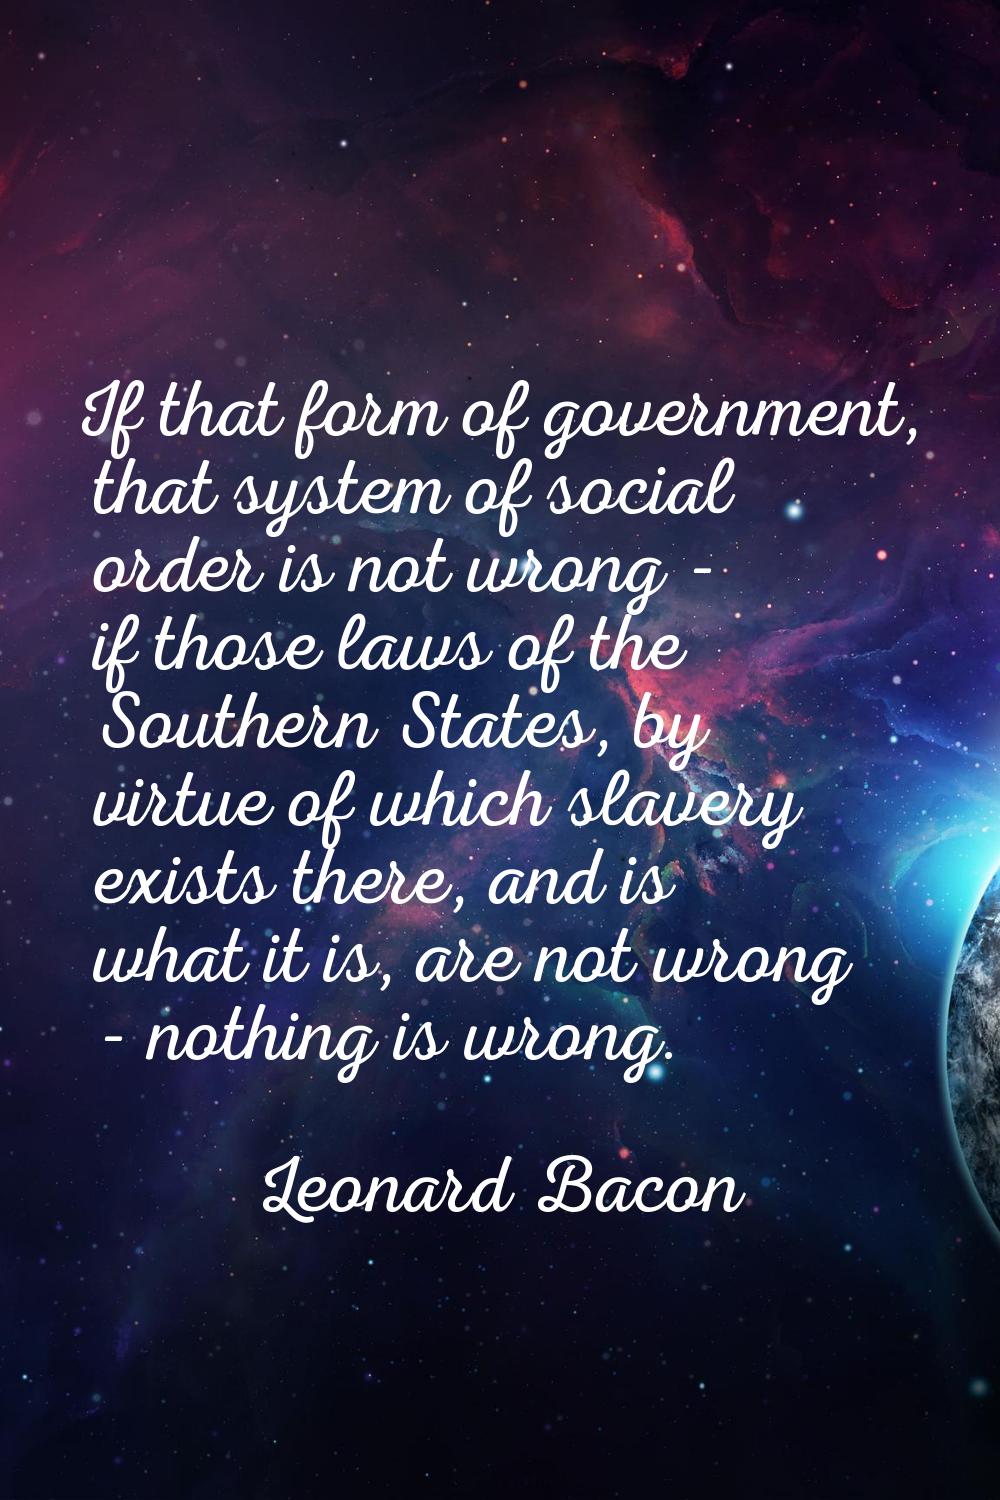 If that form of government, that system of social order is not wrong - if those laws of the Souther